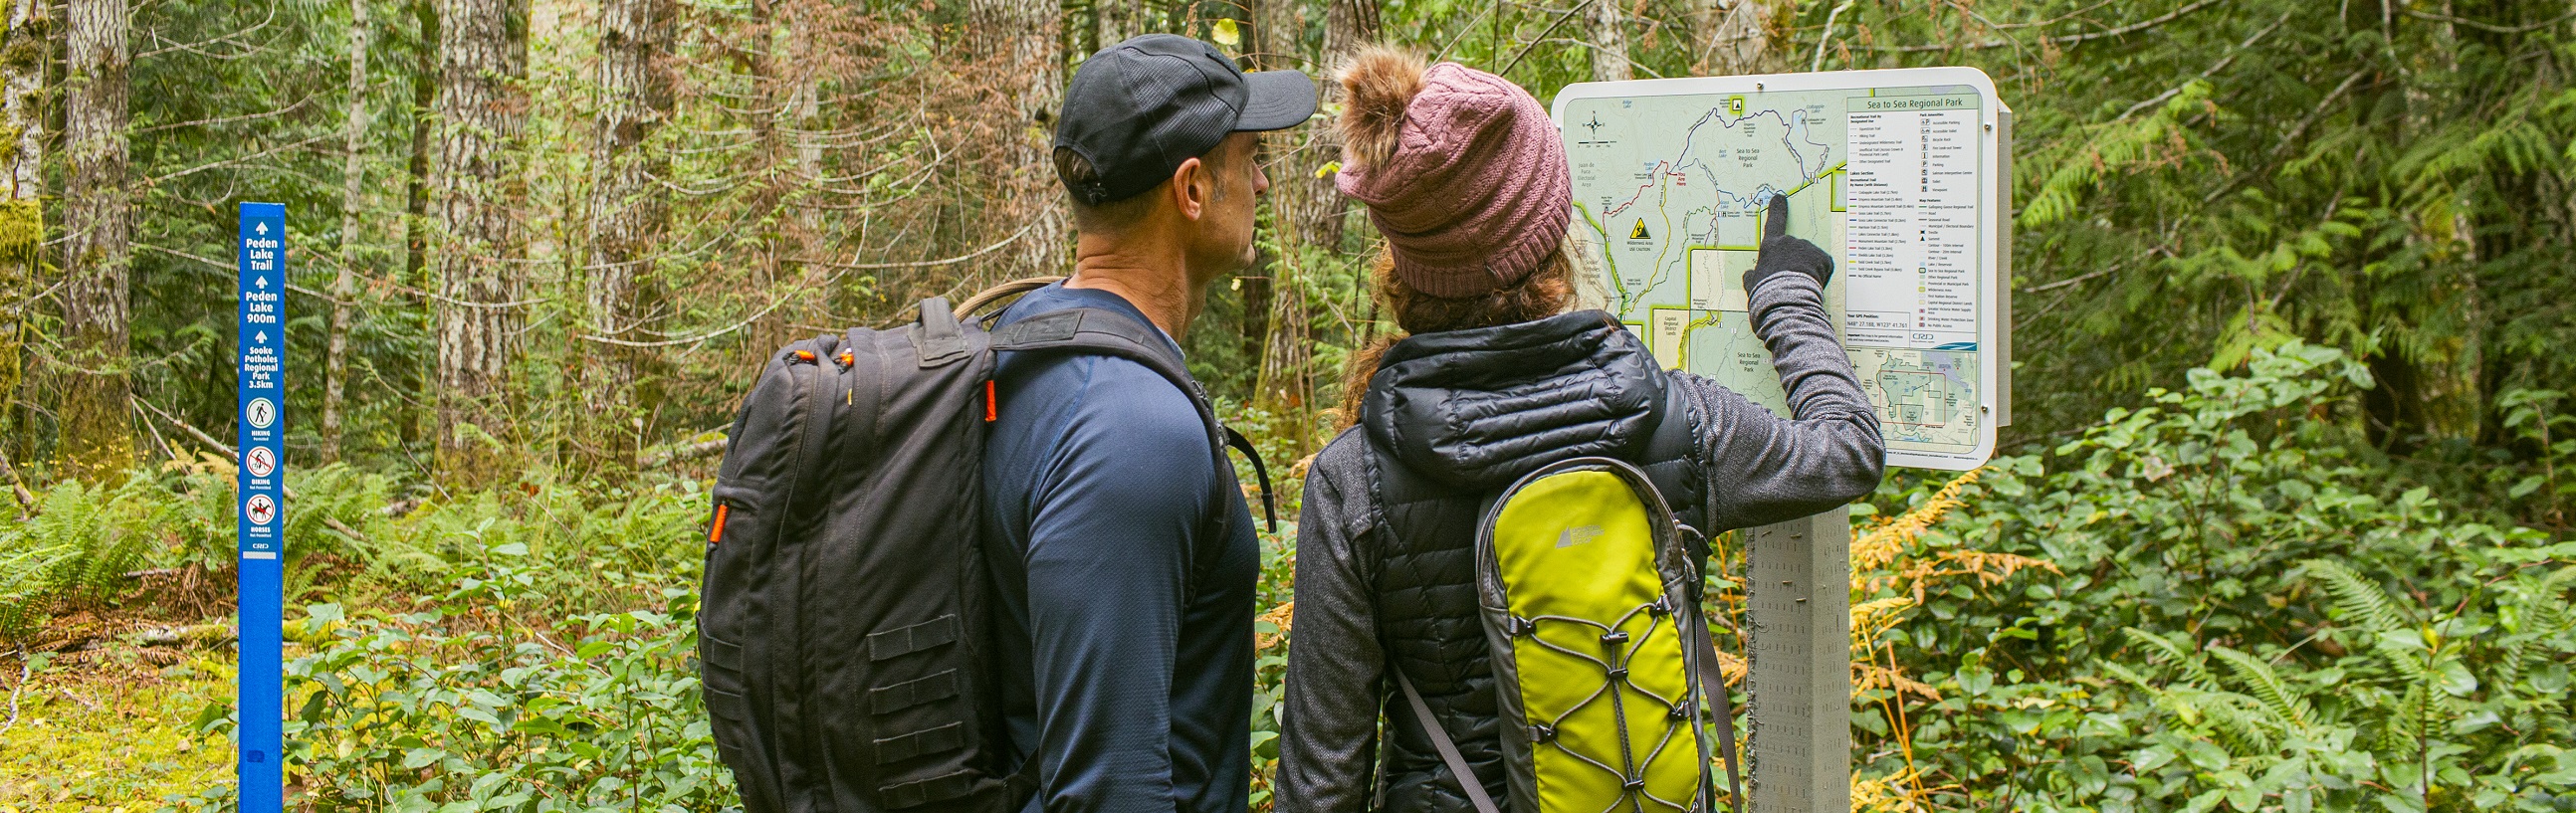 Hikers at a trail map